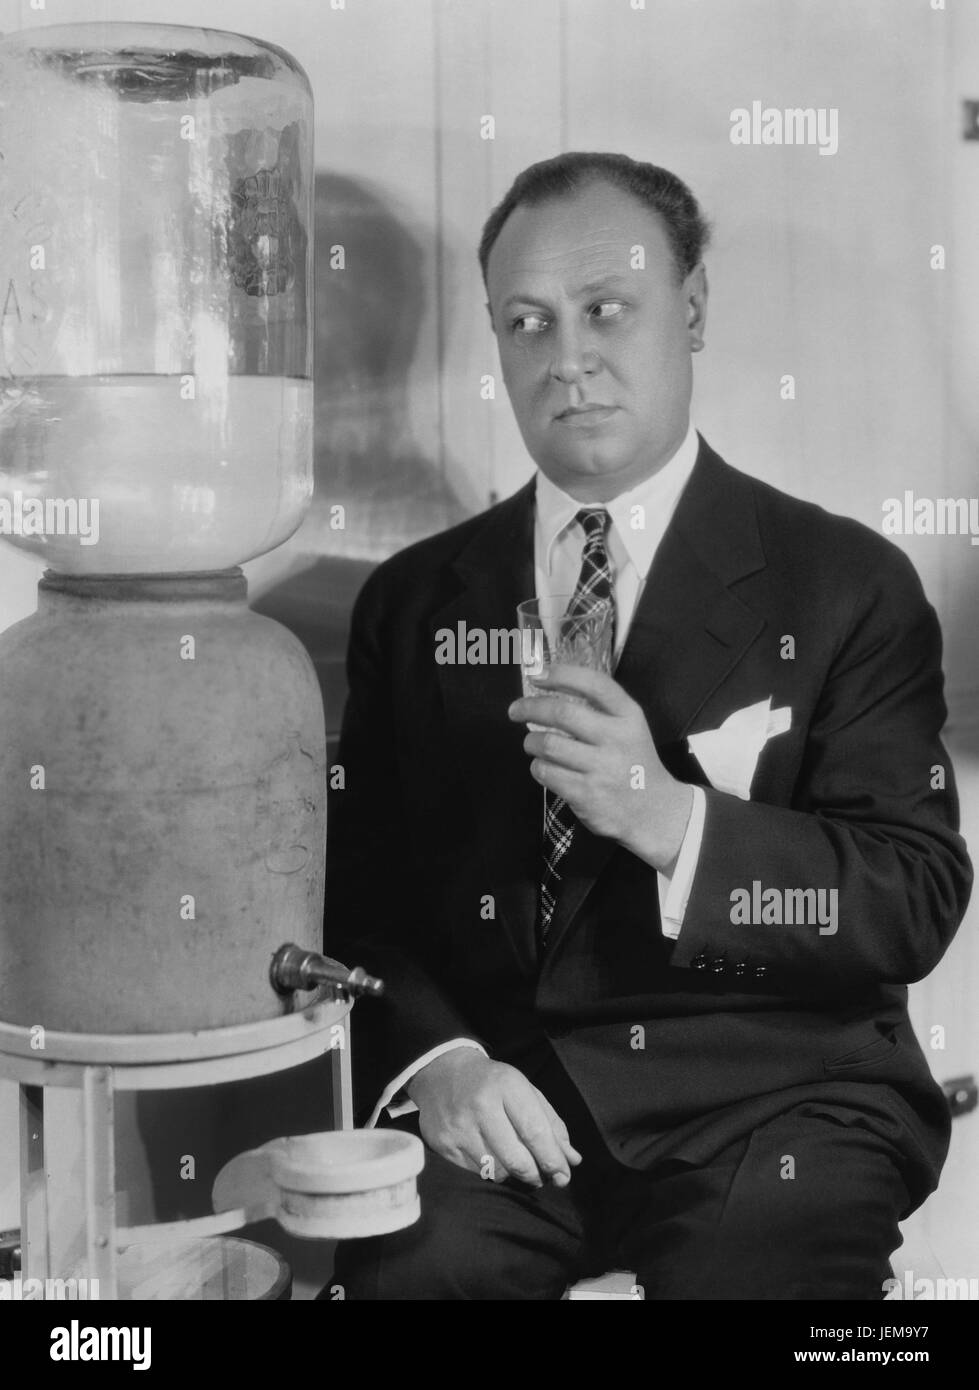 Actor Emil Jannings, Publicity Portrait at Water Cooler, 1929 Stock Photo